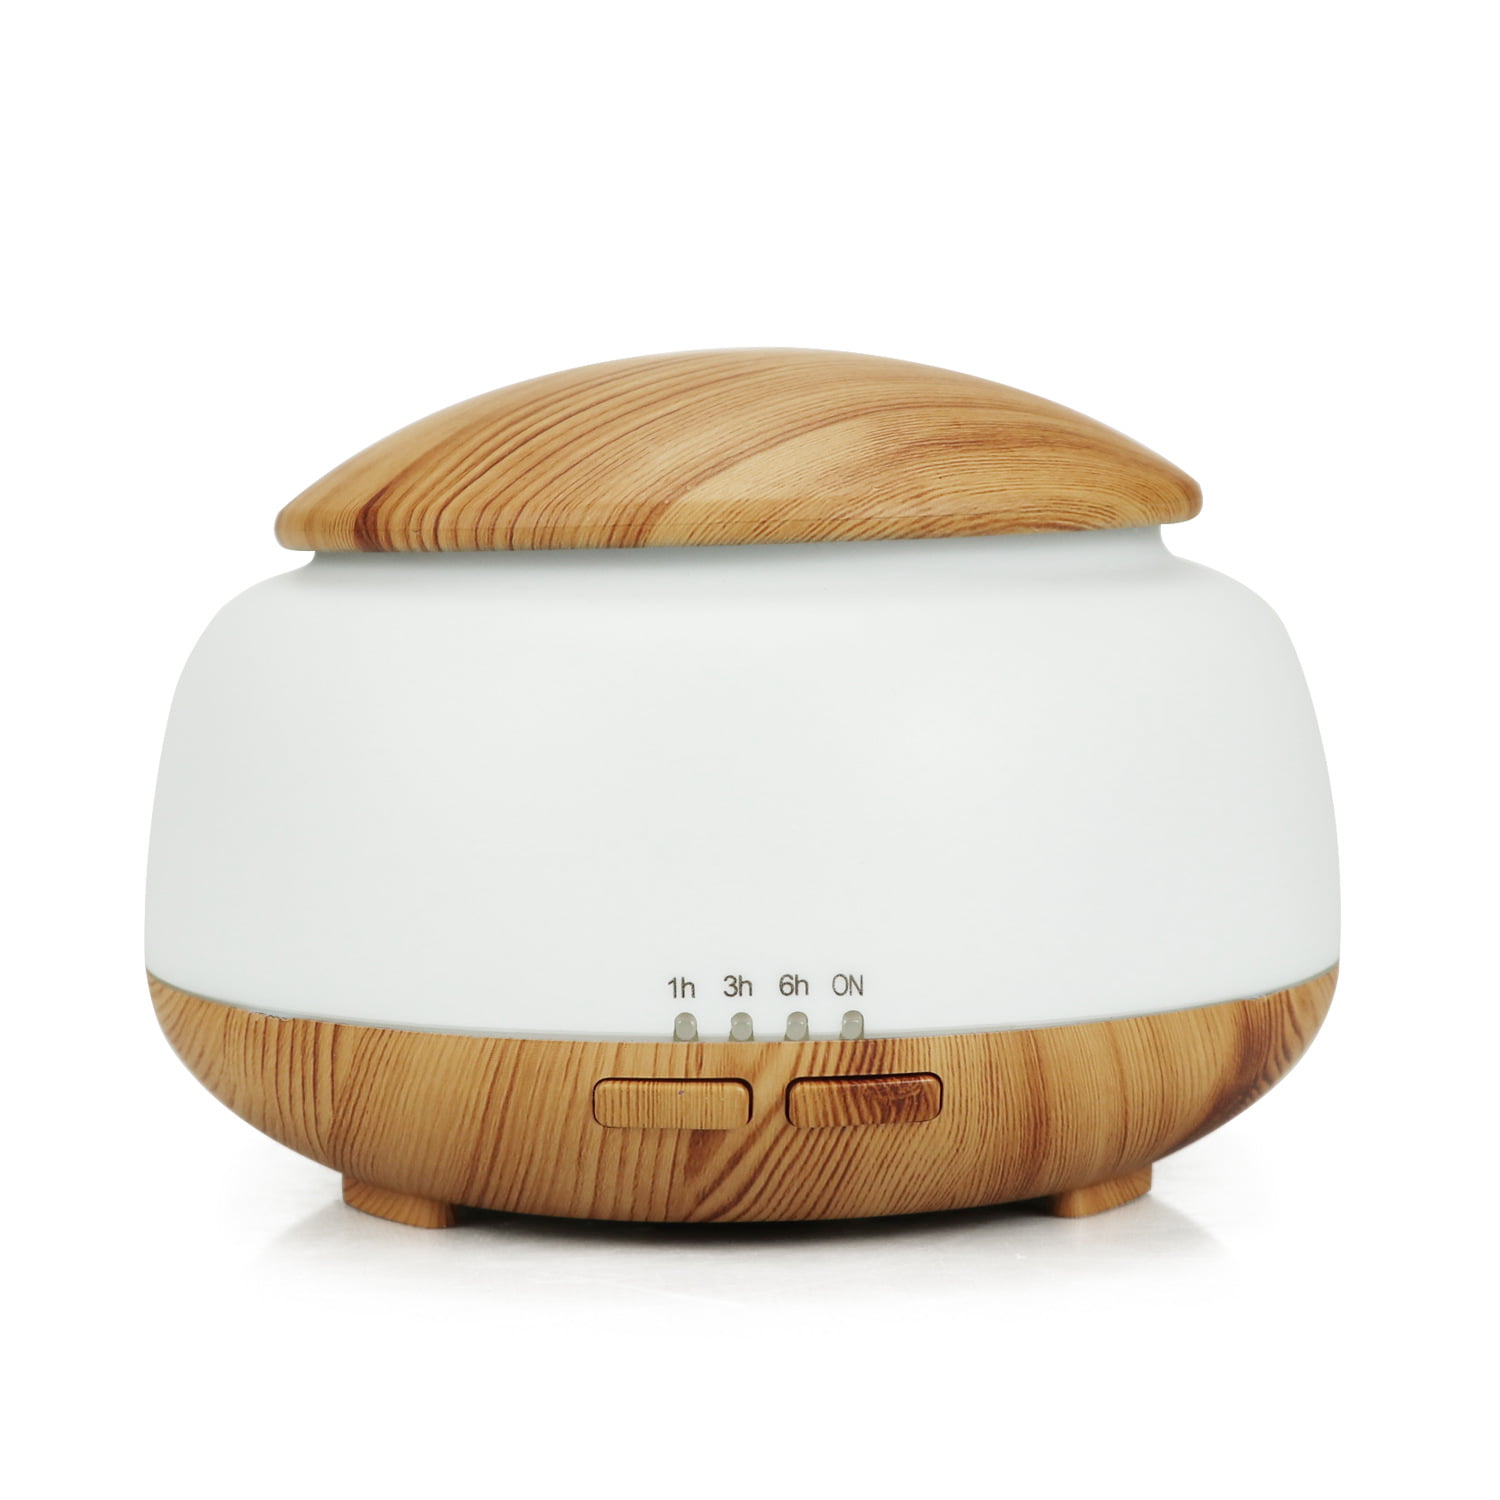 Details about   Air Fresh Mini Humidifier Diffuser Ultrasonic Aroma Essential Oil Diffuser 